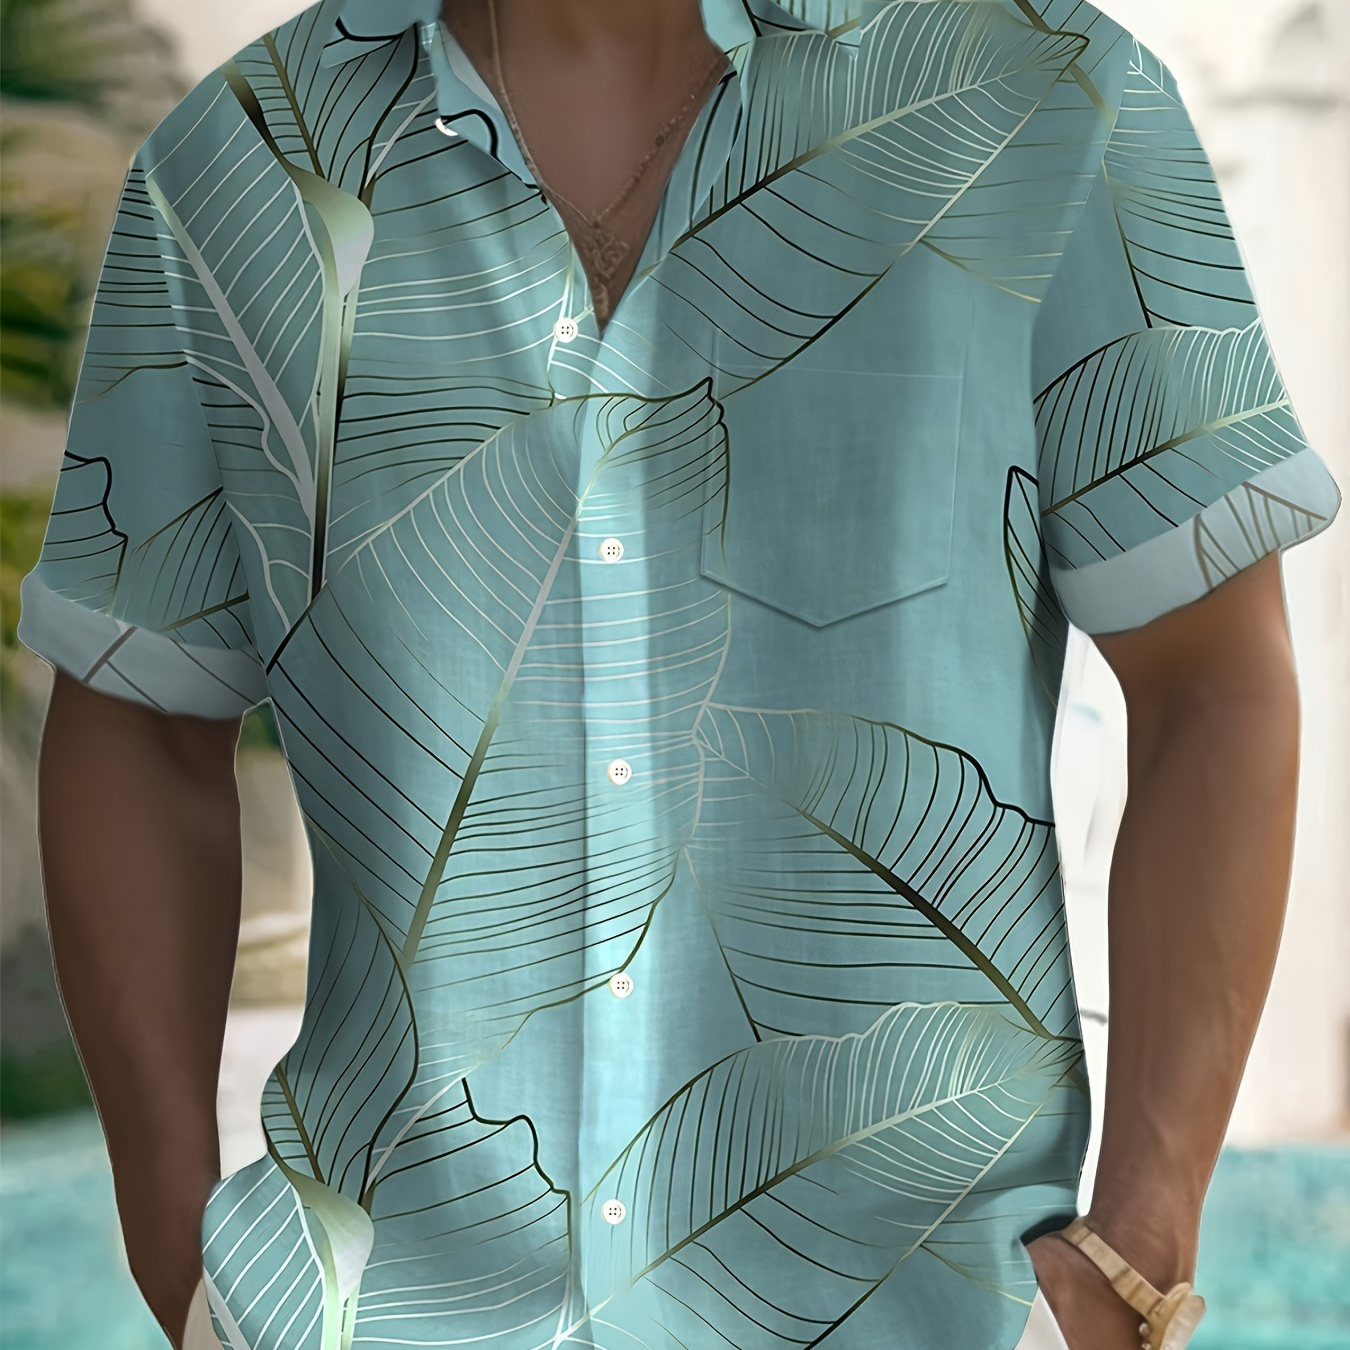 

Plus Size Men's Tropical Leaf Graphic Print Shirt For Summer, Trendy Casual Short Sleeve Shirt, Hawaiian Style Holiday Tops